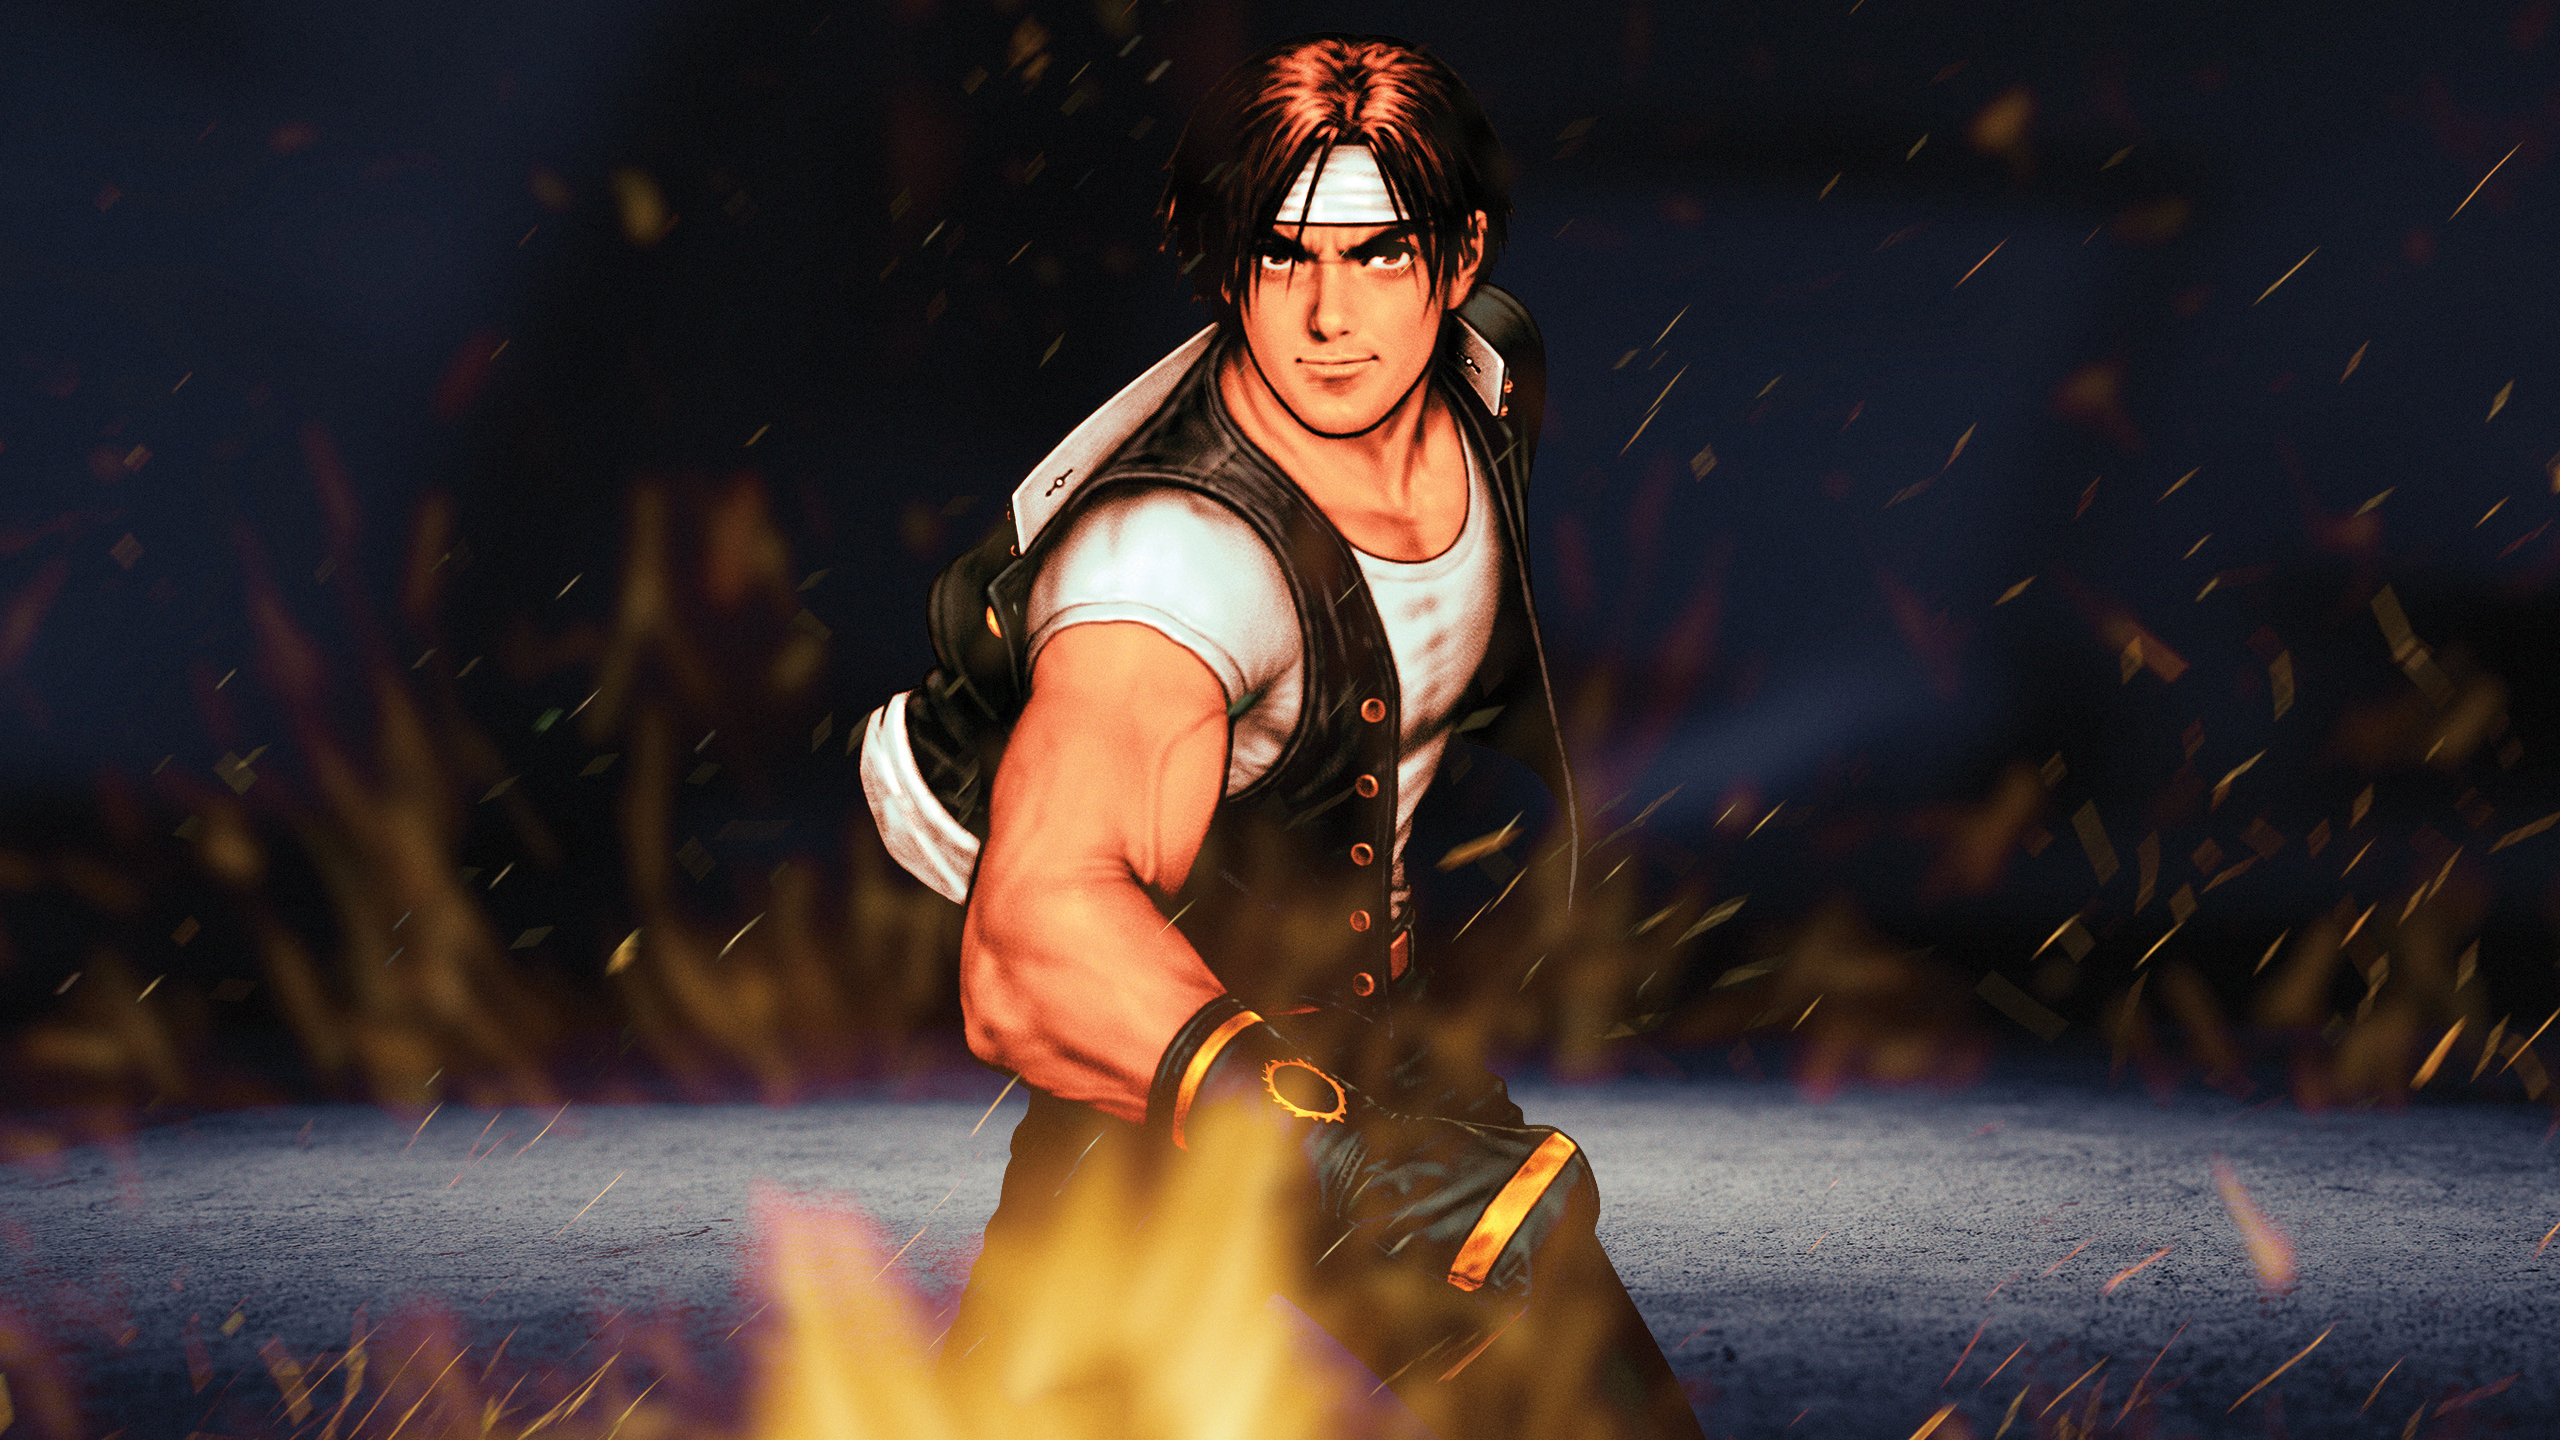 Anime 2560x1440 King of Fighters Kyo Kusanagi anime boys anime muscles warrior video games video game men video game warriors